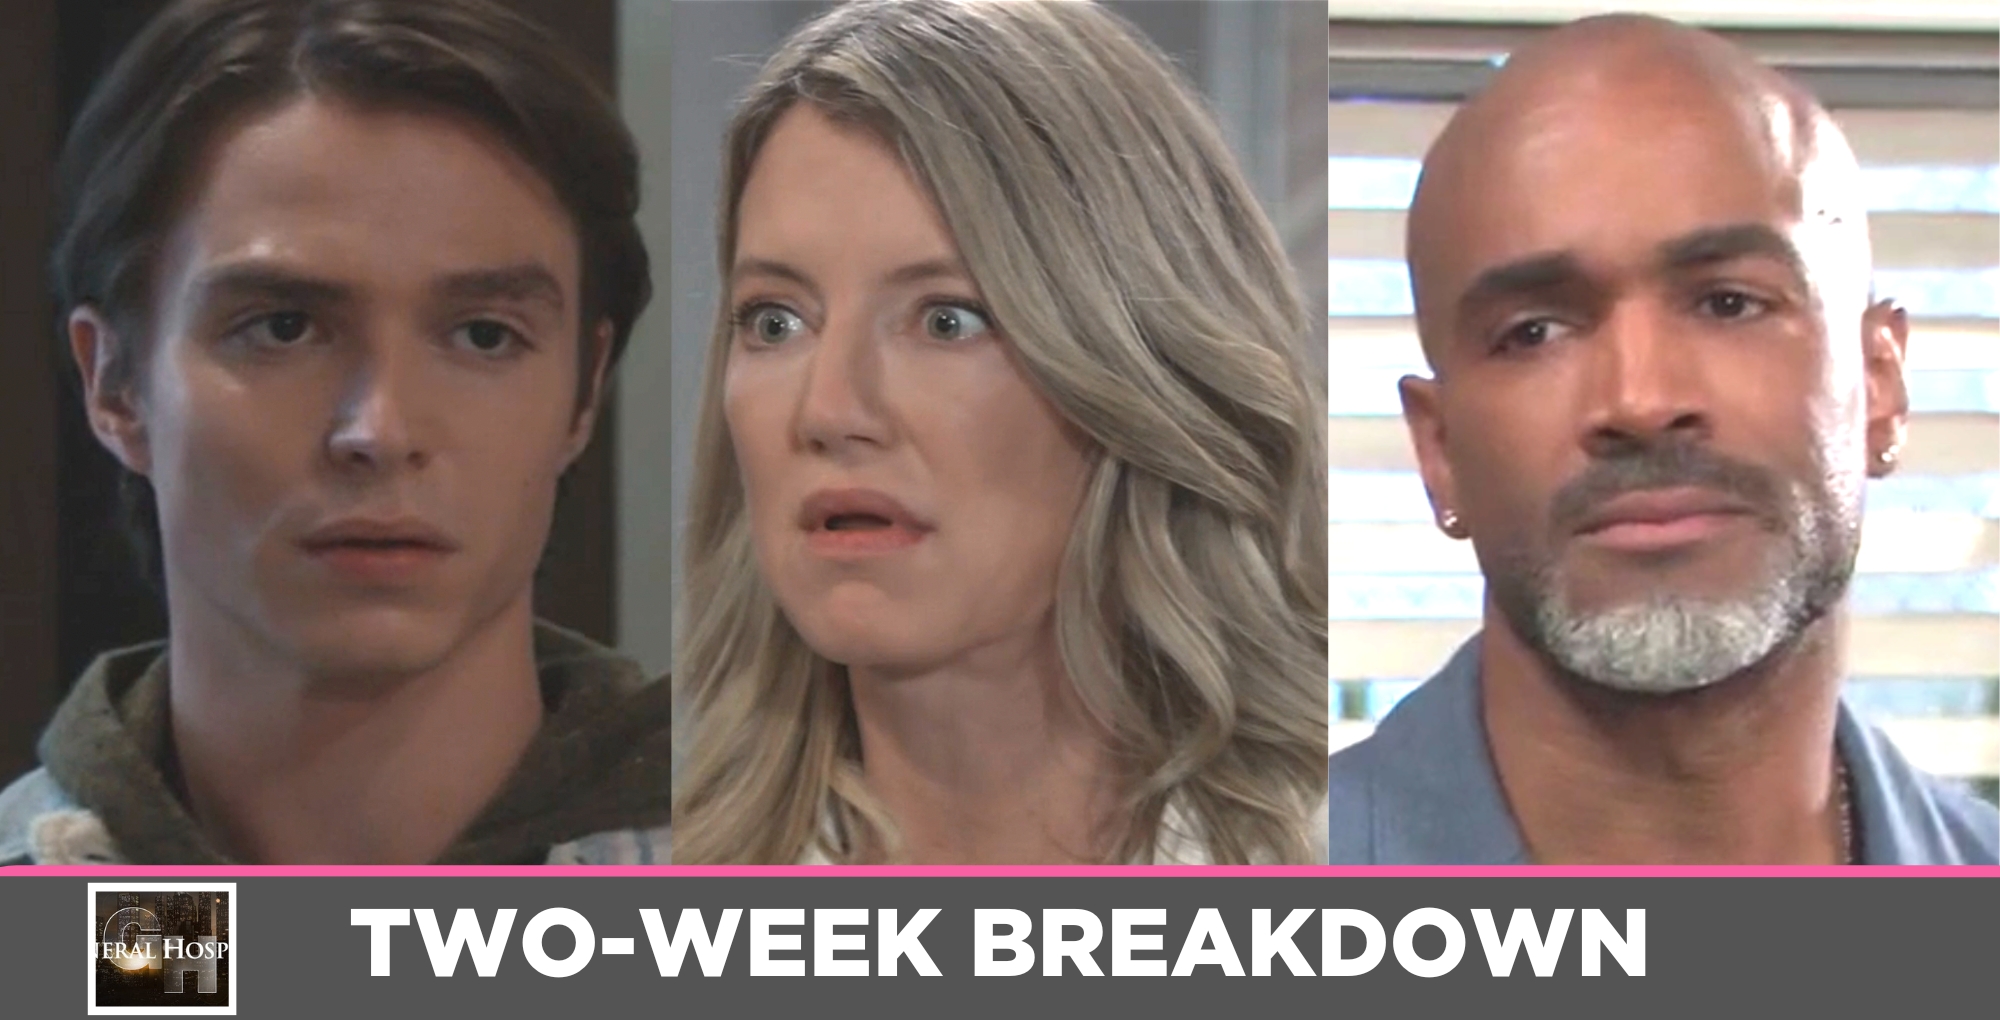 general hospital spoilers two week breakdown with spencer, nina, and curtis